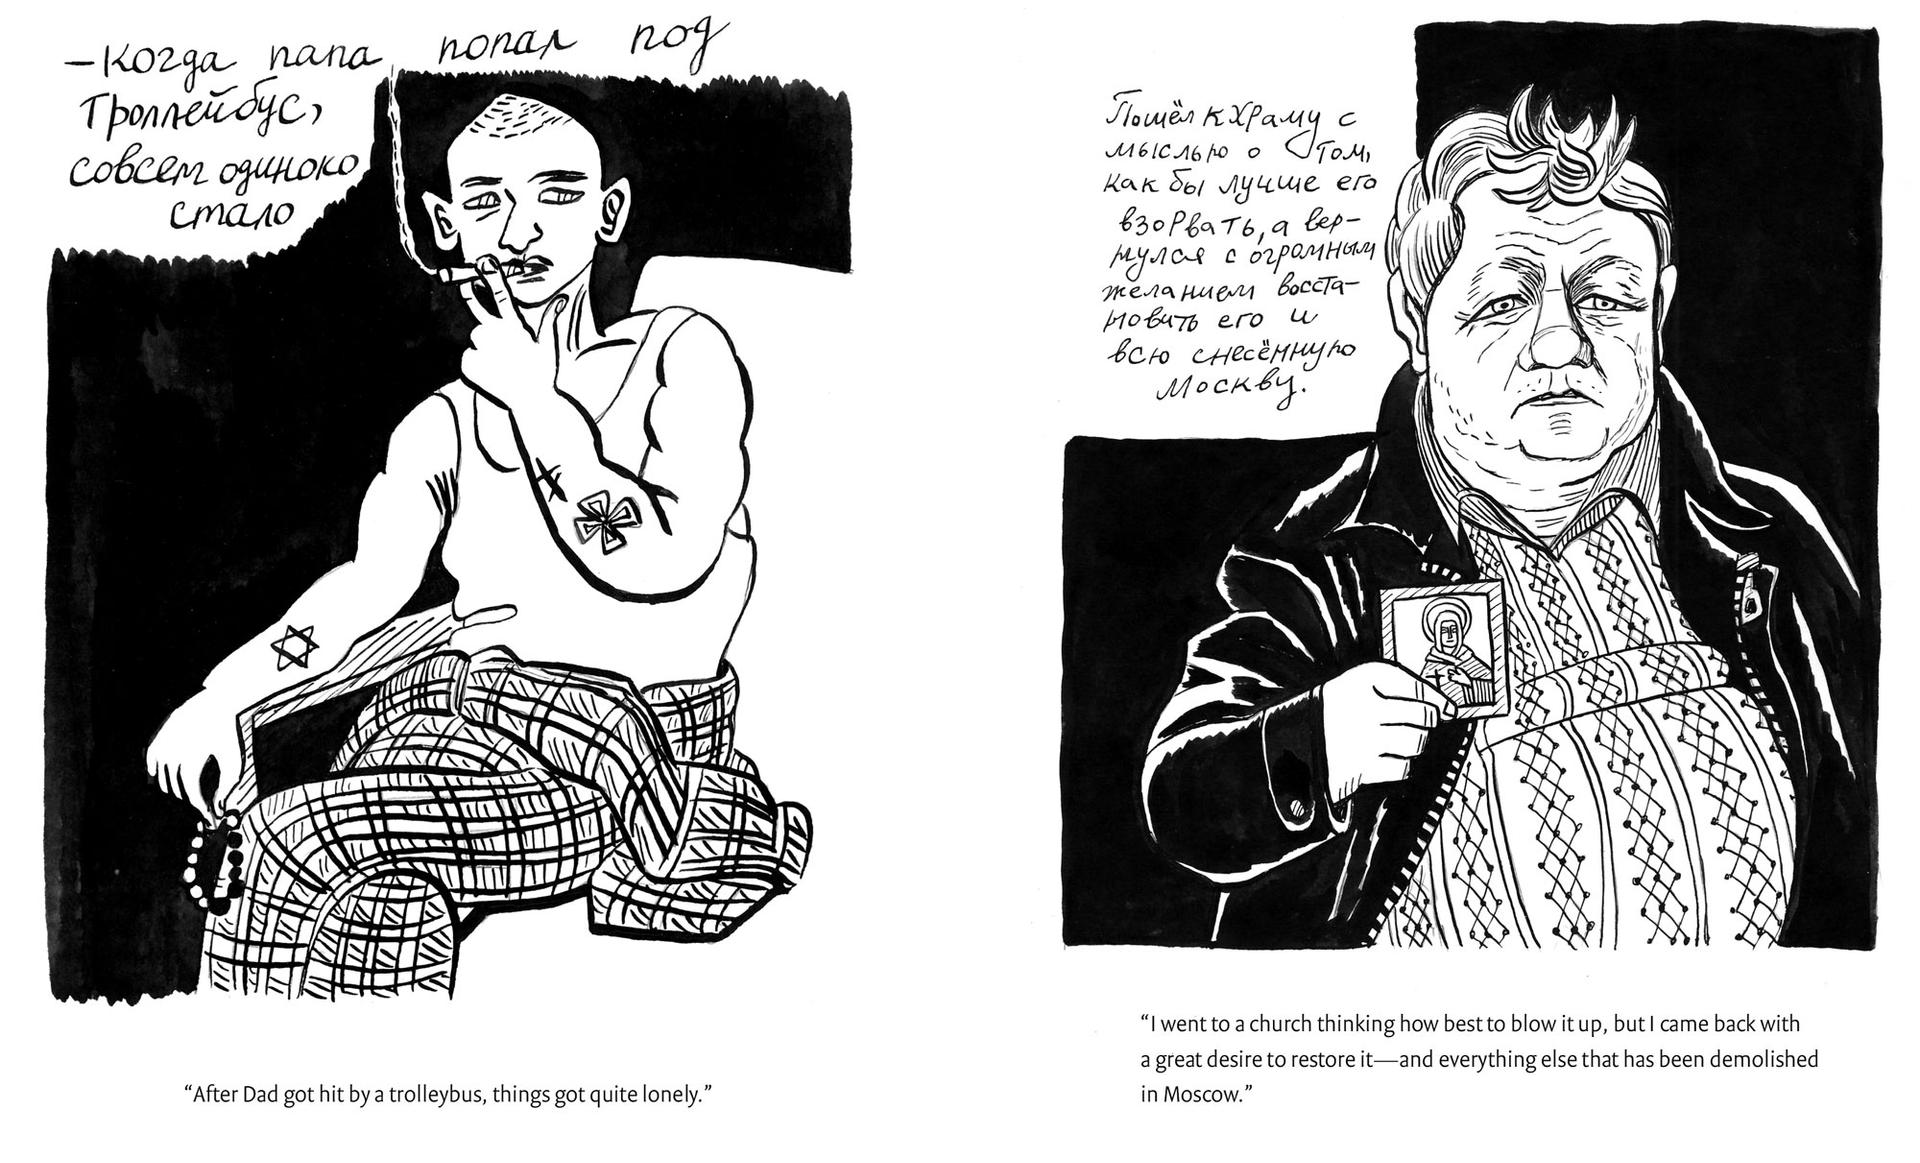 An illustration on the left shows a man smoking and on the right an older man holds photo of a religious figure.